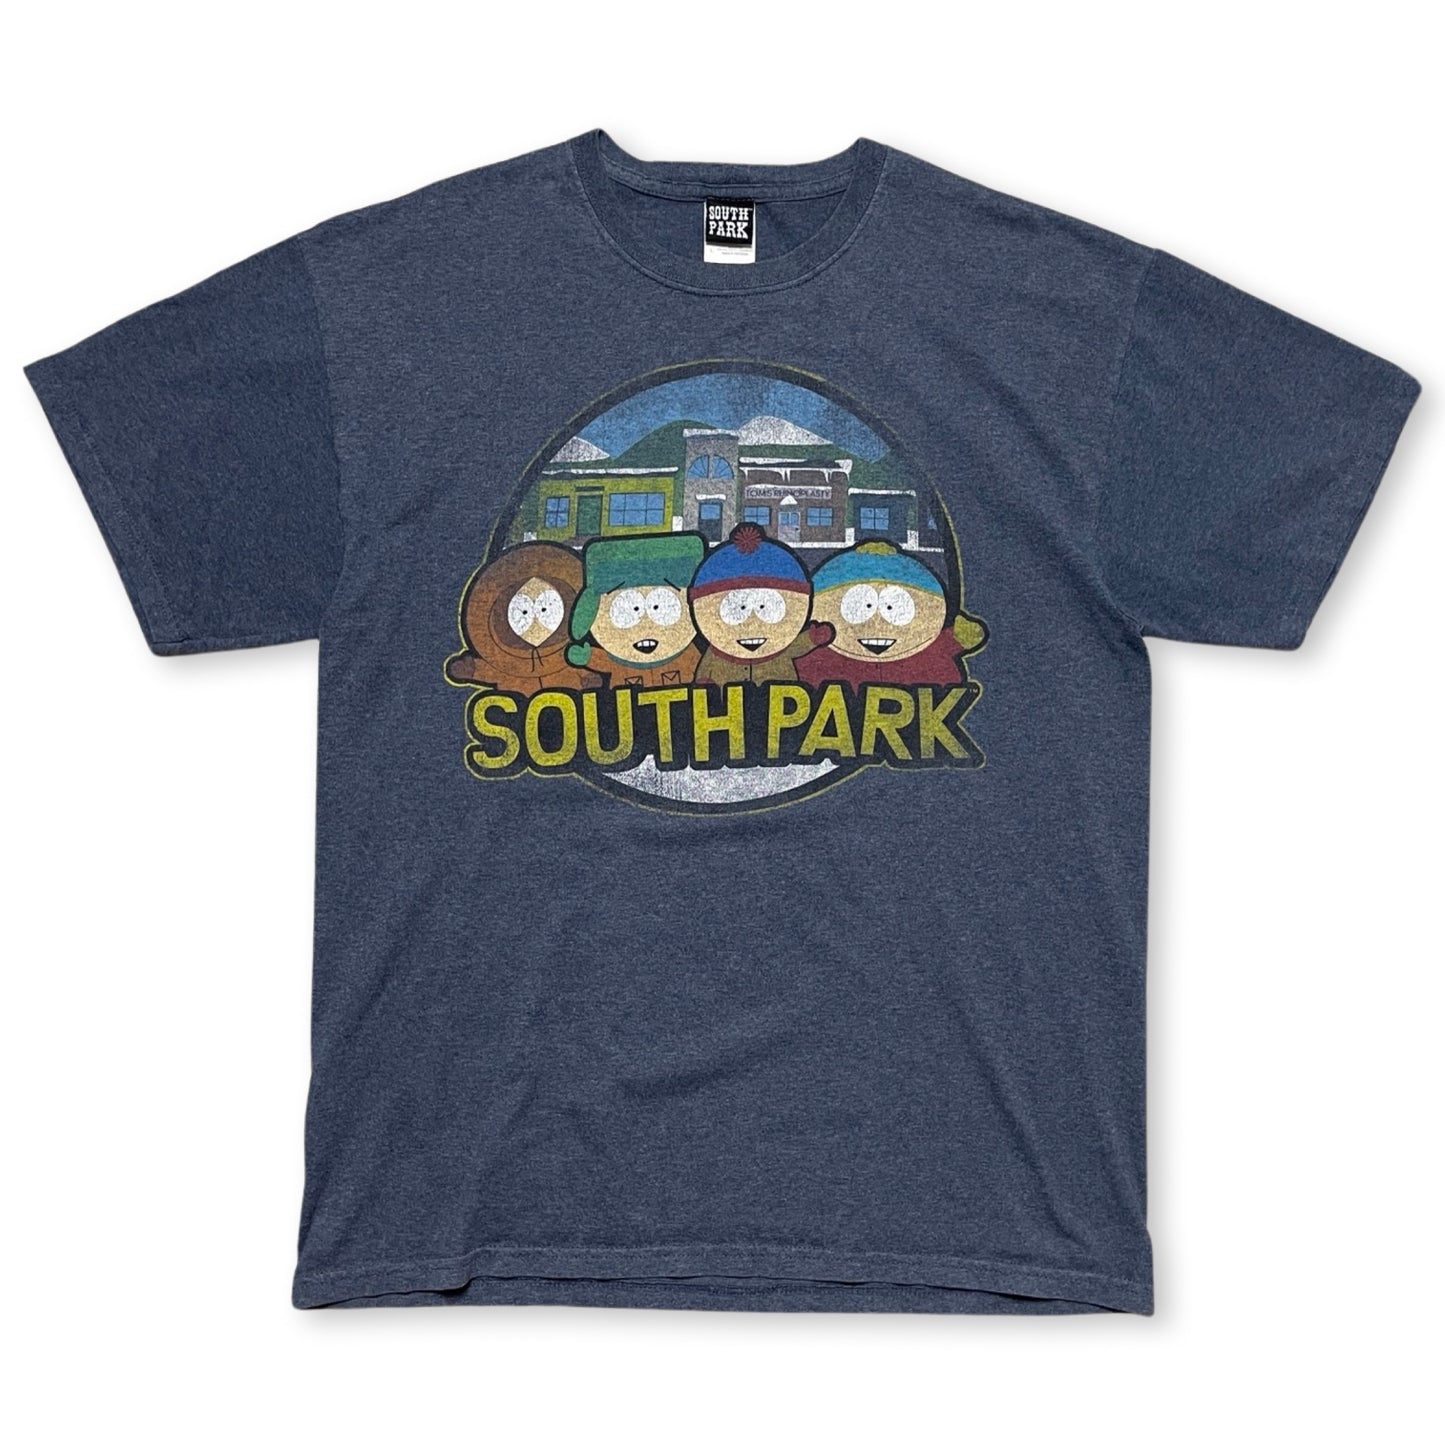 South Park Tee (Large)